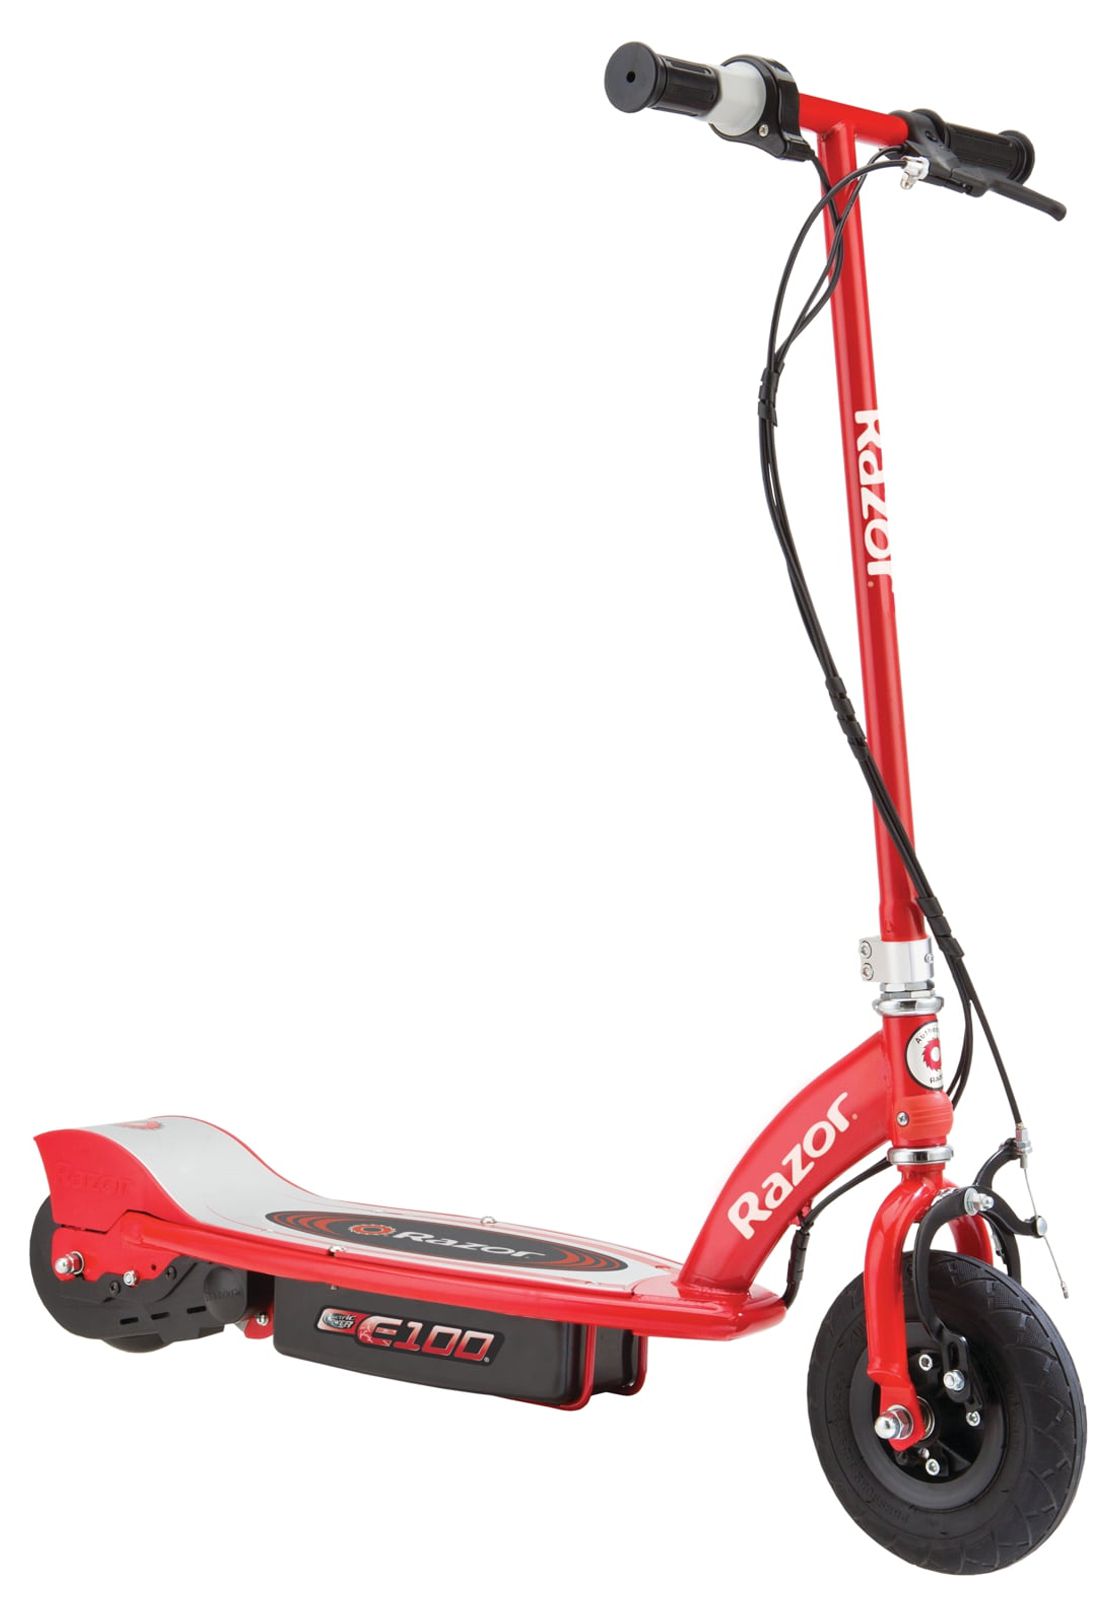 Razor E100 Electric Scooter - Red, for Kids Ages 8+ and up to 120 lbs, 8" Pneumatic Front Tire, 100W Chain Motor, Up to 10 mph & Up to 40 mins of Ride Time, 24V Sealed Lead-Acid Battery - image 1 of 8